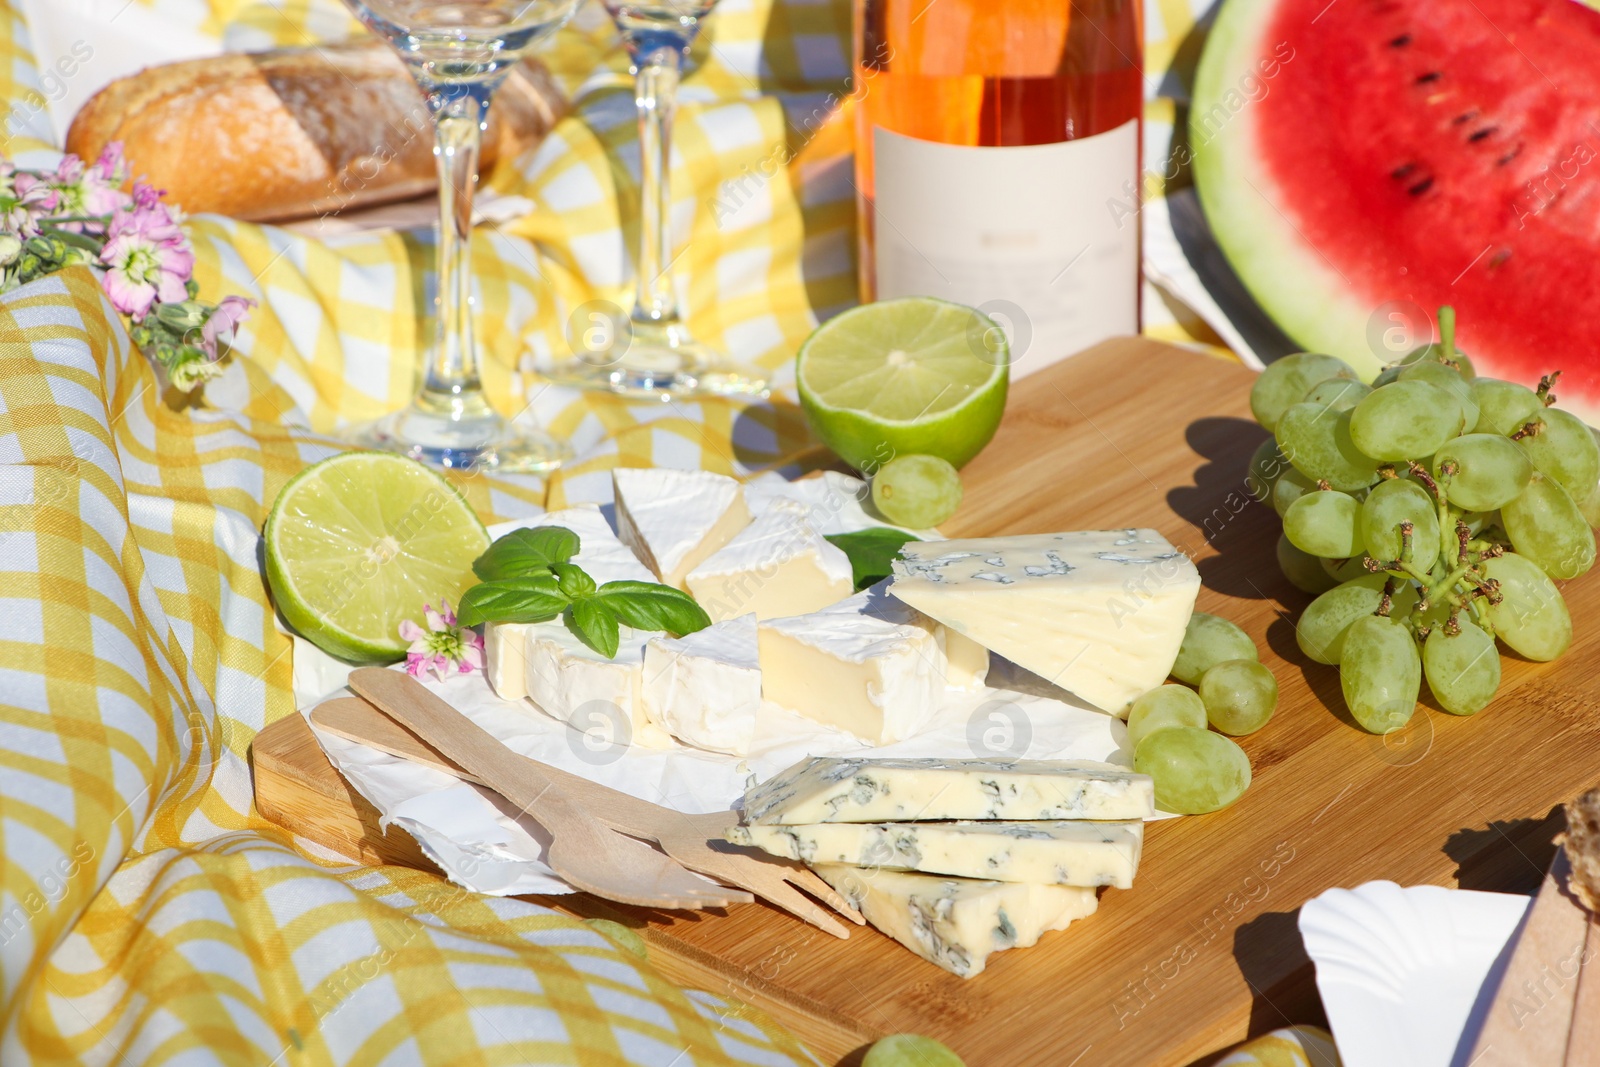 Photo of Delicious food and wine on picnic blanket, closeup